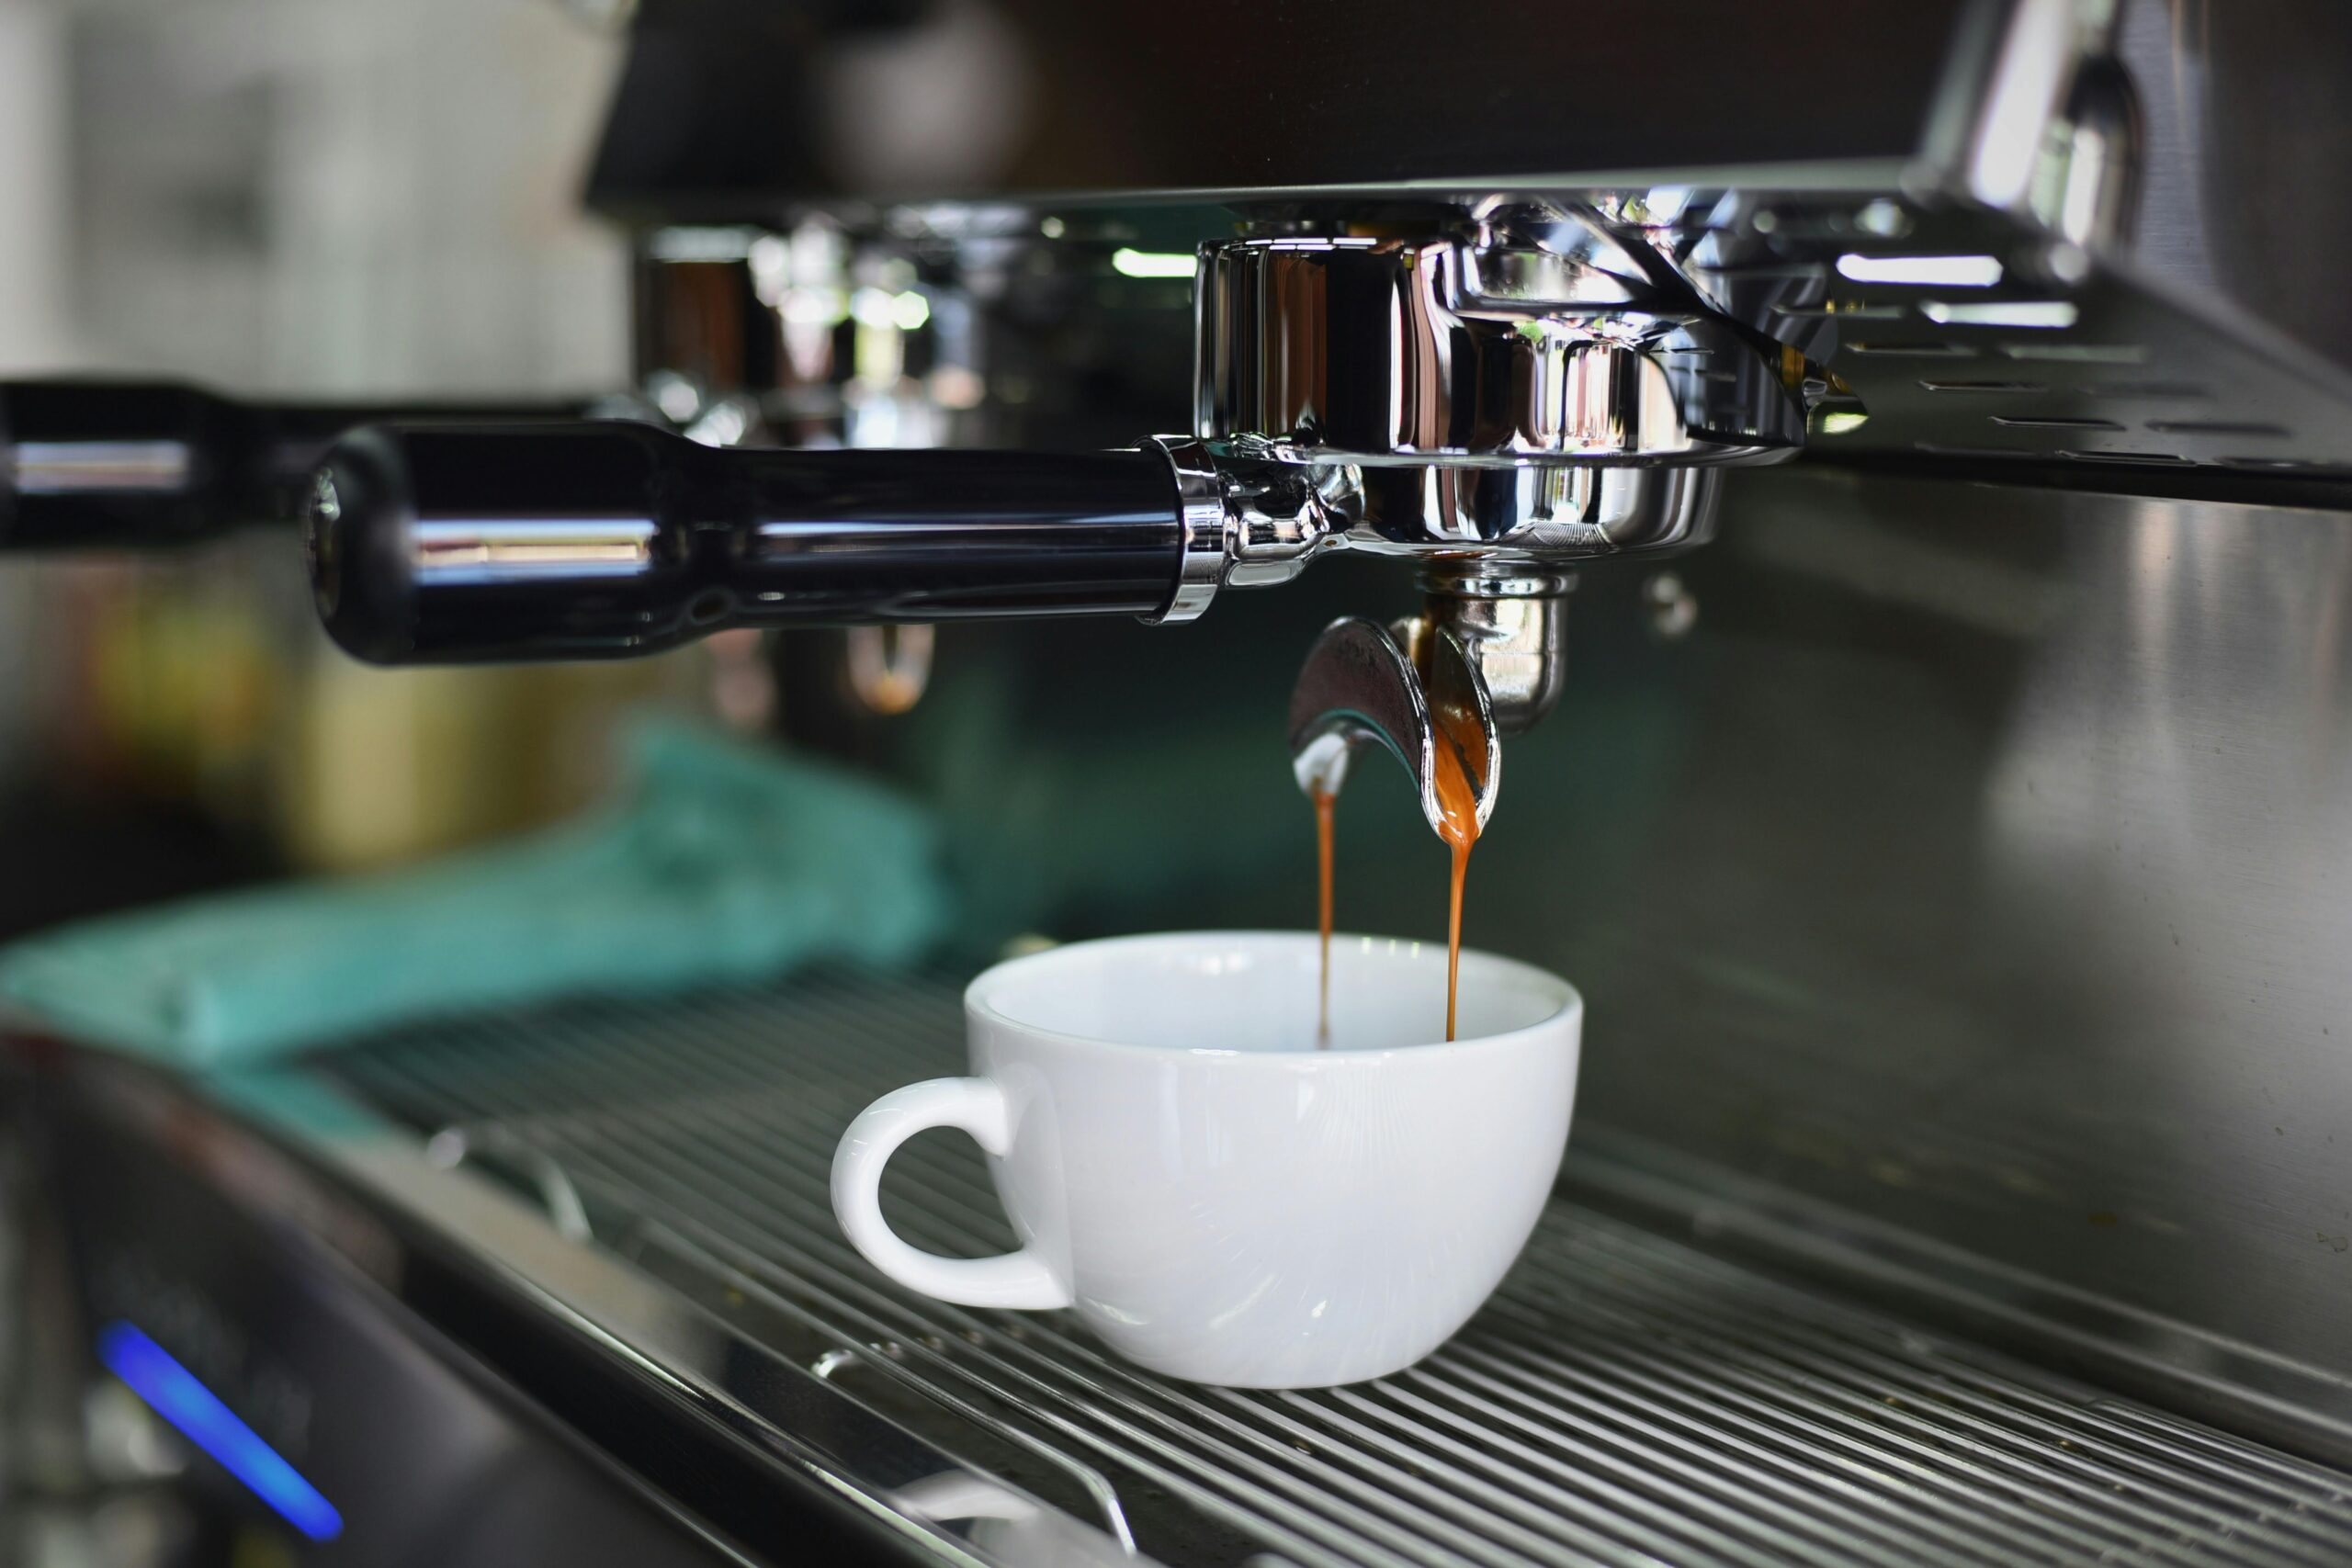 Barista Secrets Tips and Tricks for Using Your Coffee Machine Like a Pro